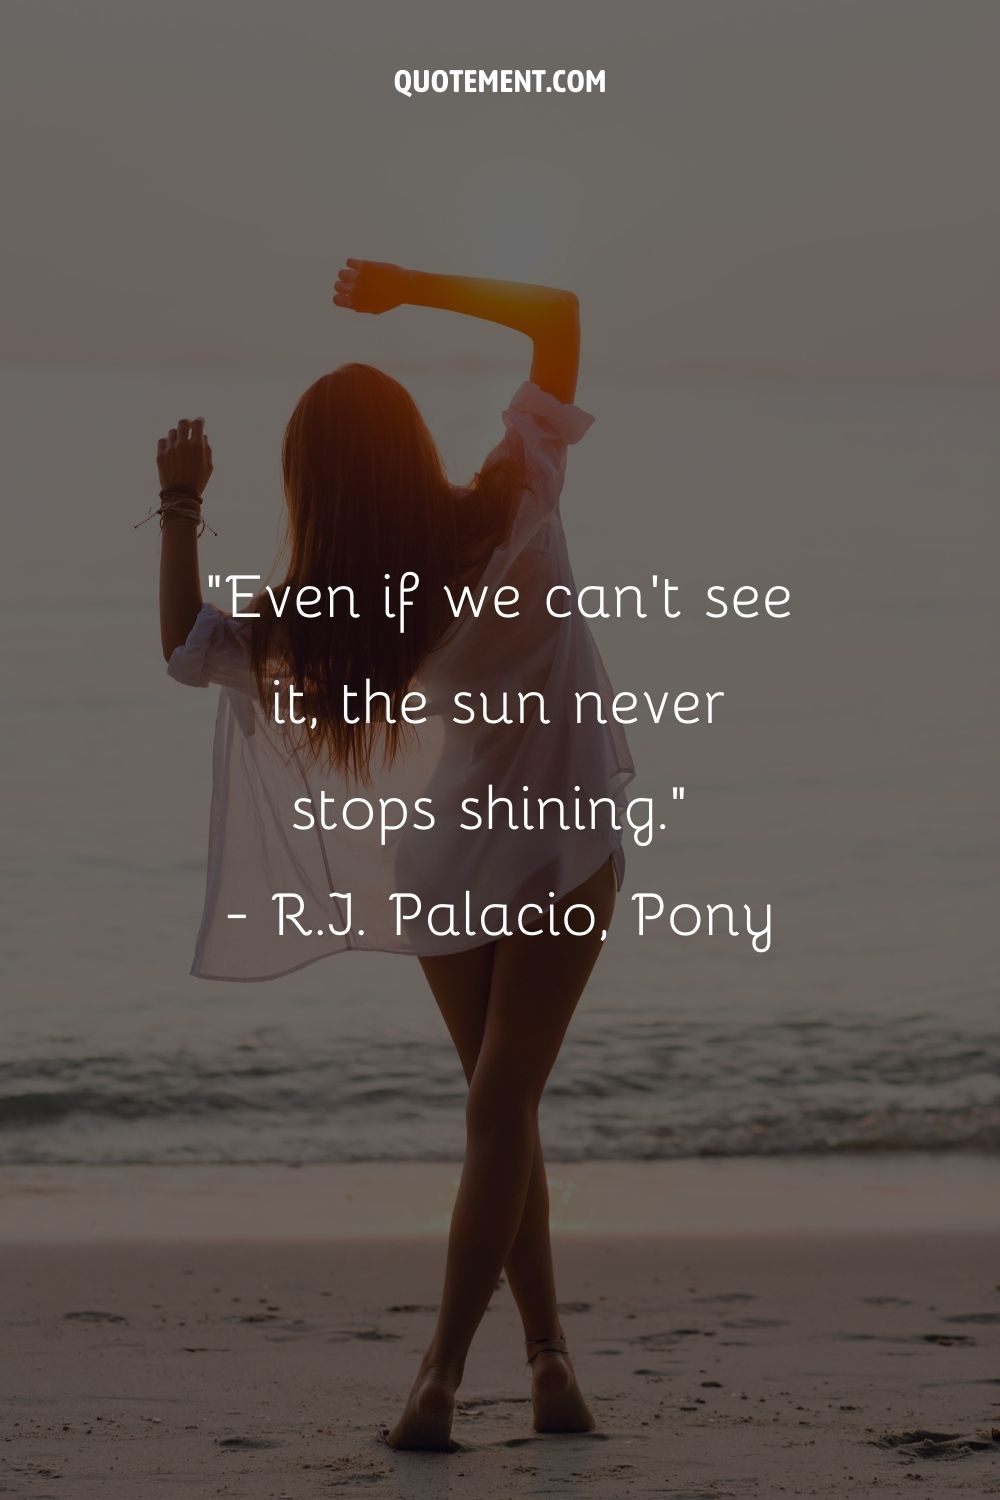 Even if we can’t see it, the sun never stops shining.” ― R.J. Palacio